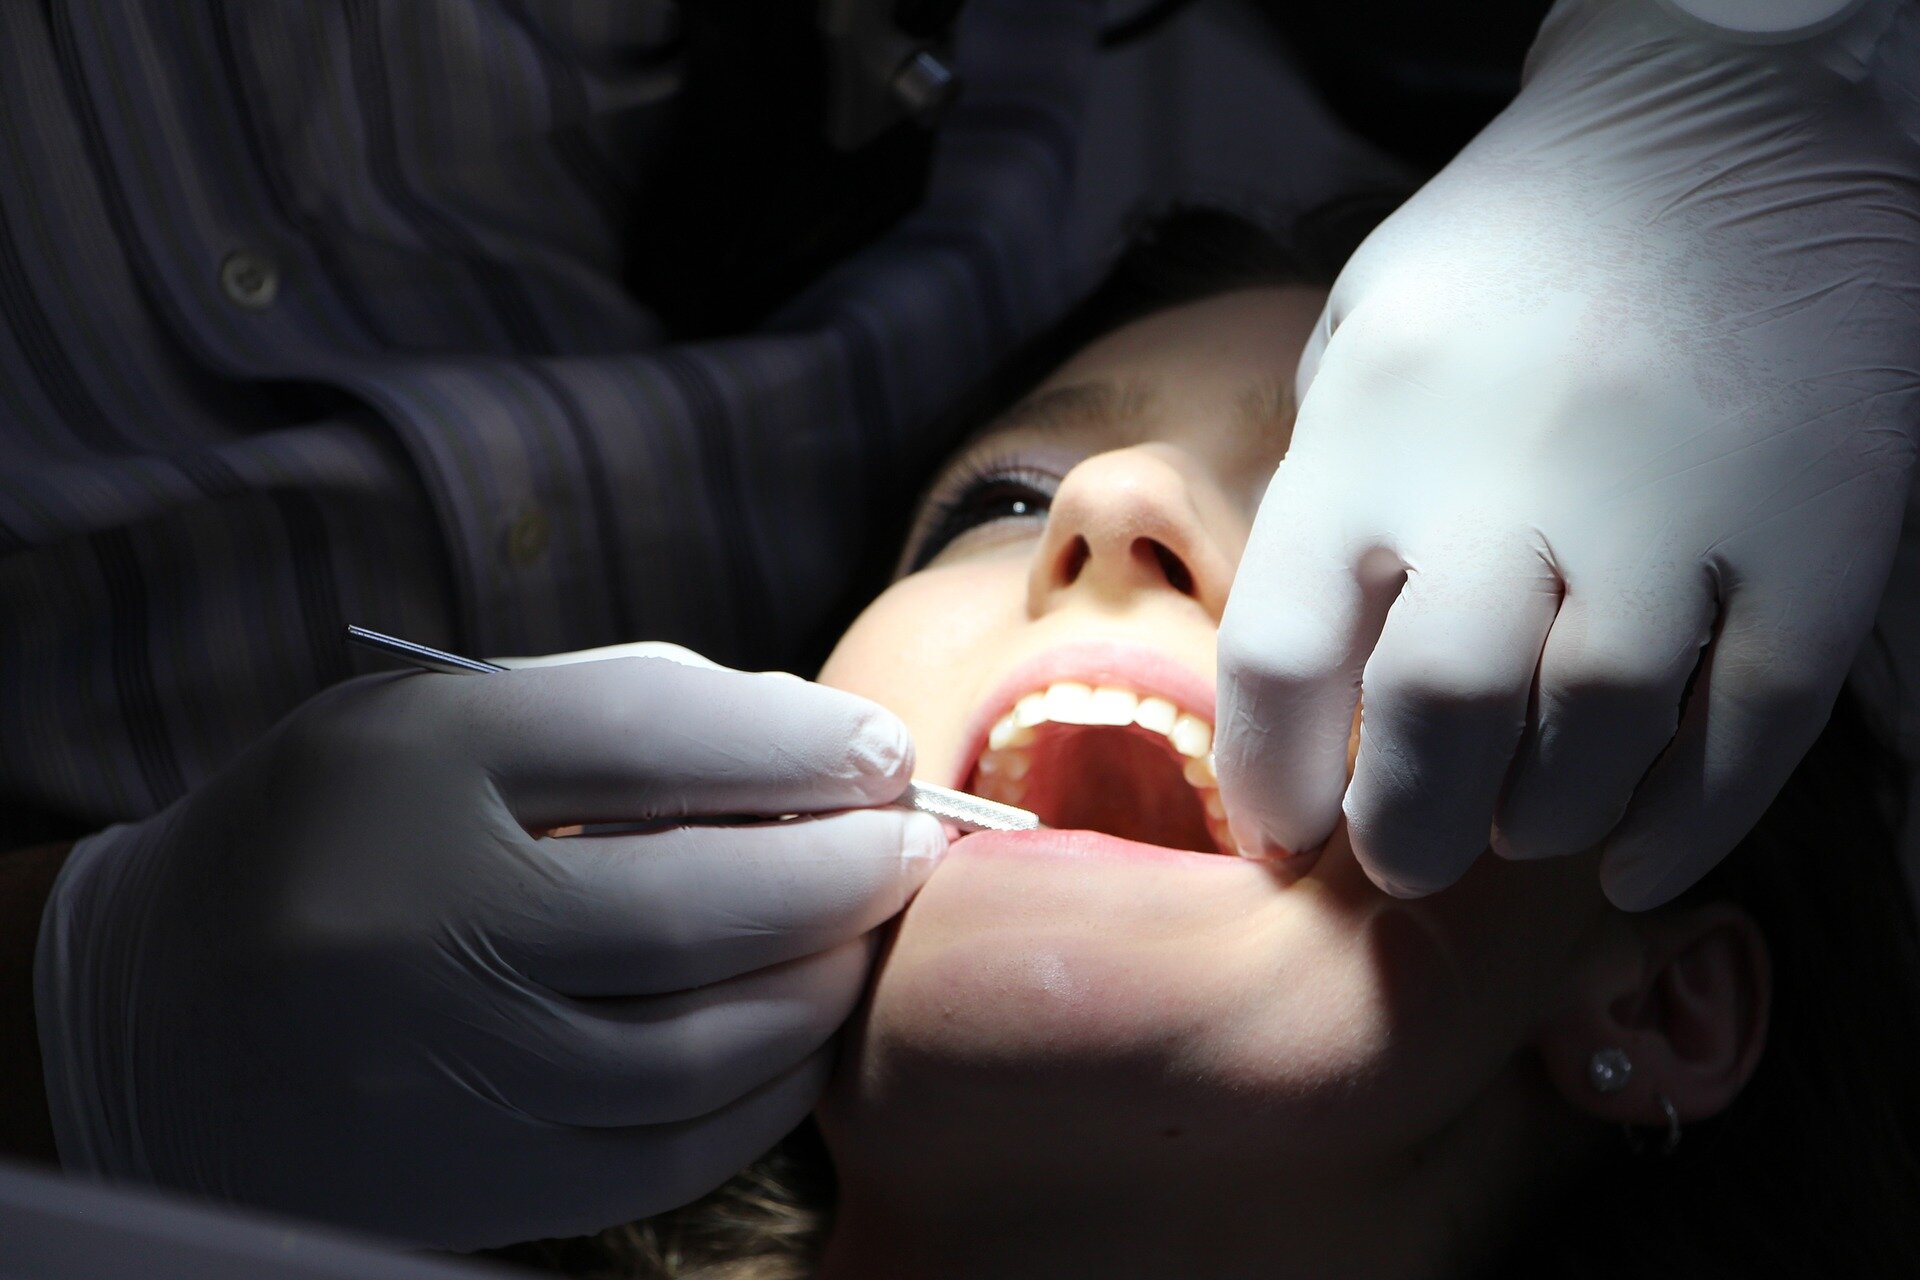 Visits to the dentist can evoke memories of traumatic sexual abuse